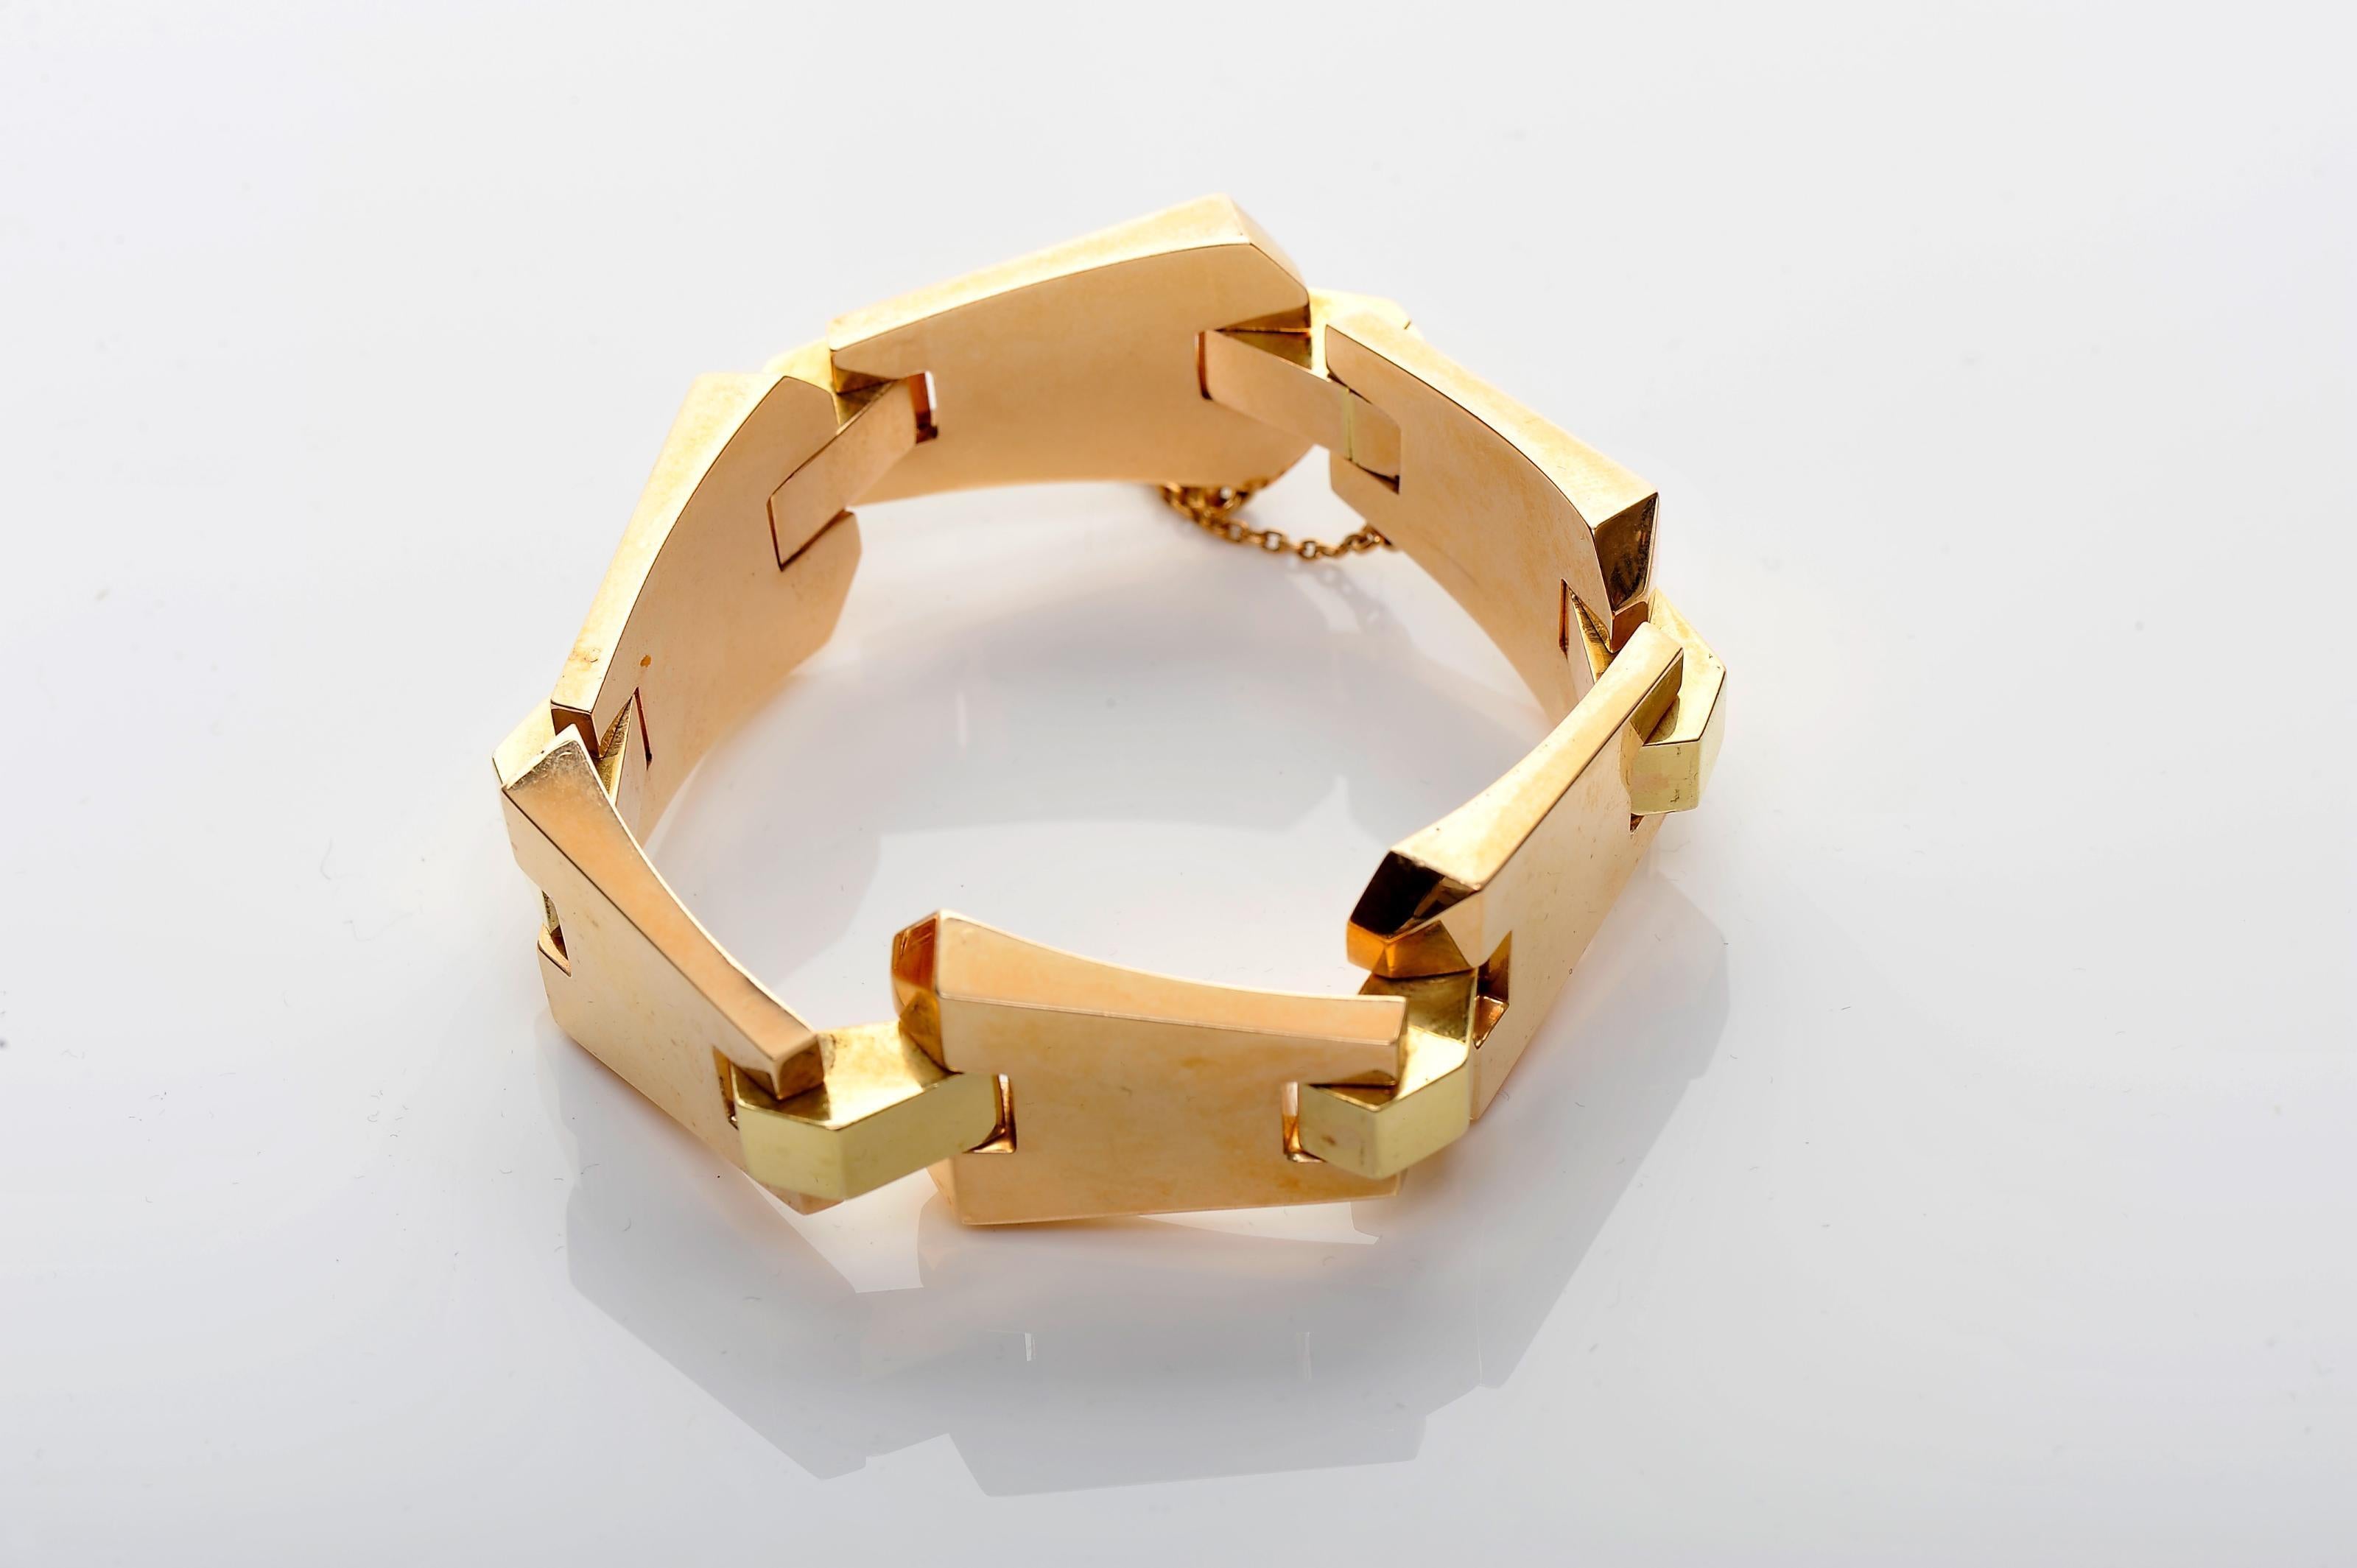 Art Deco Geometric Bracelet in 19.2 Karat Bicolor Rose and Yellow Gold, with Provenance, Portugal, 1930s/1940s. Designed as stylized Art Moderne tank bracelet composed of a sequence of six tapering trapeze segments in polished pink gold connected by